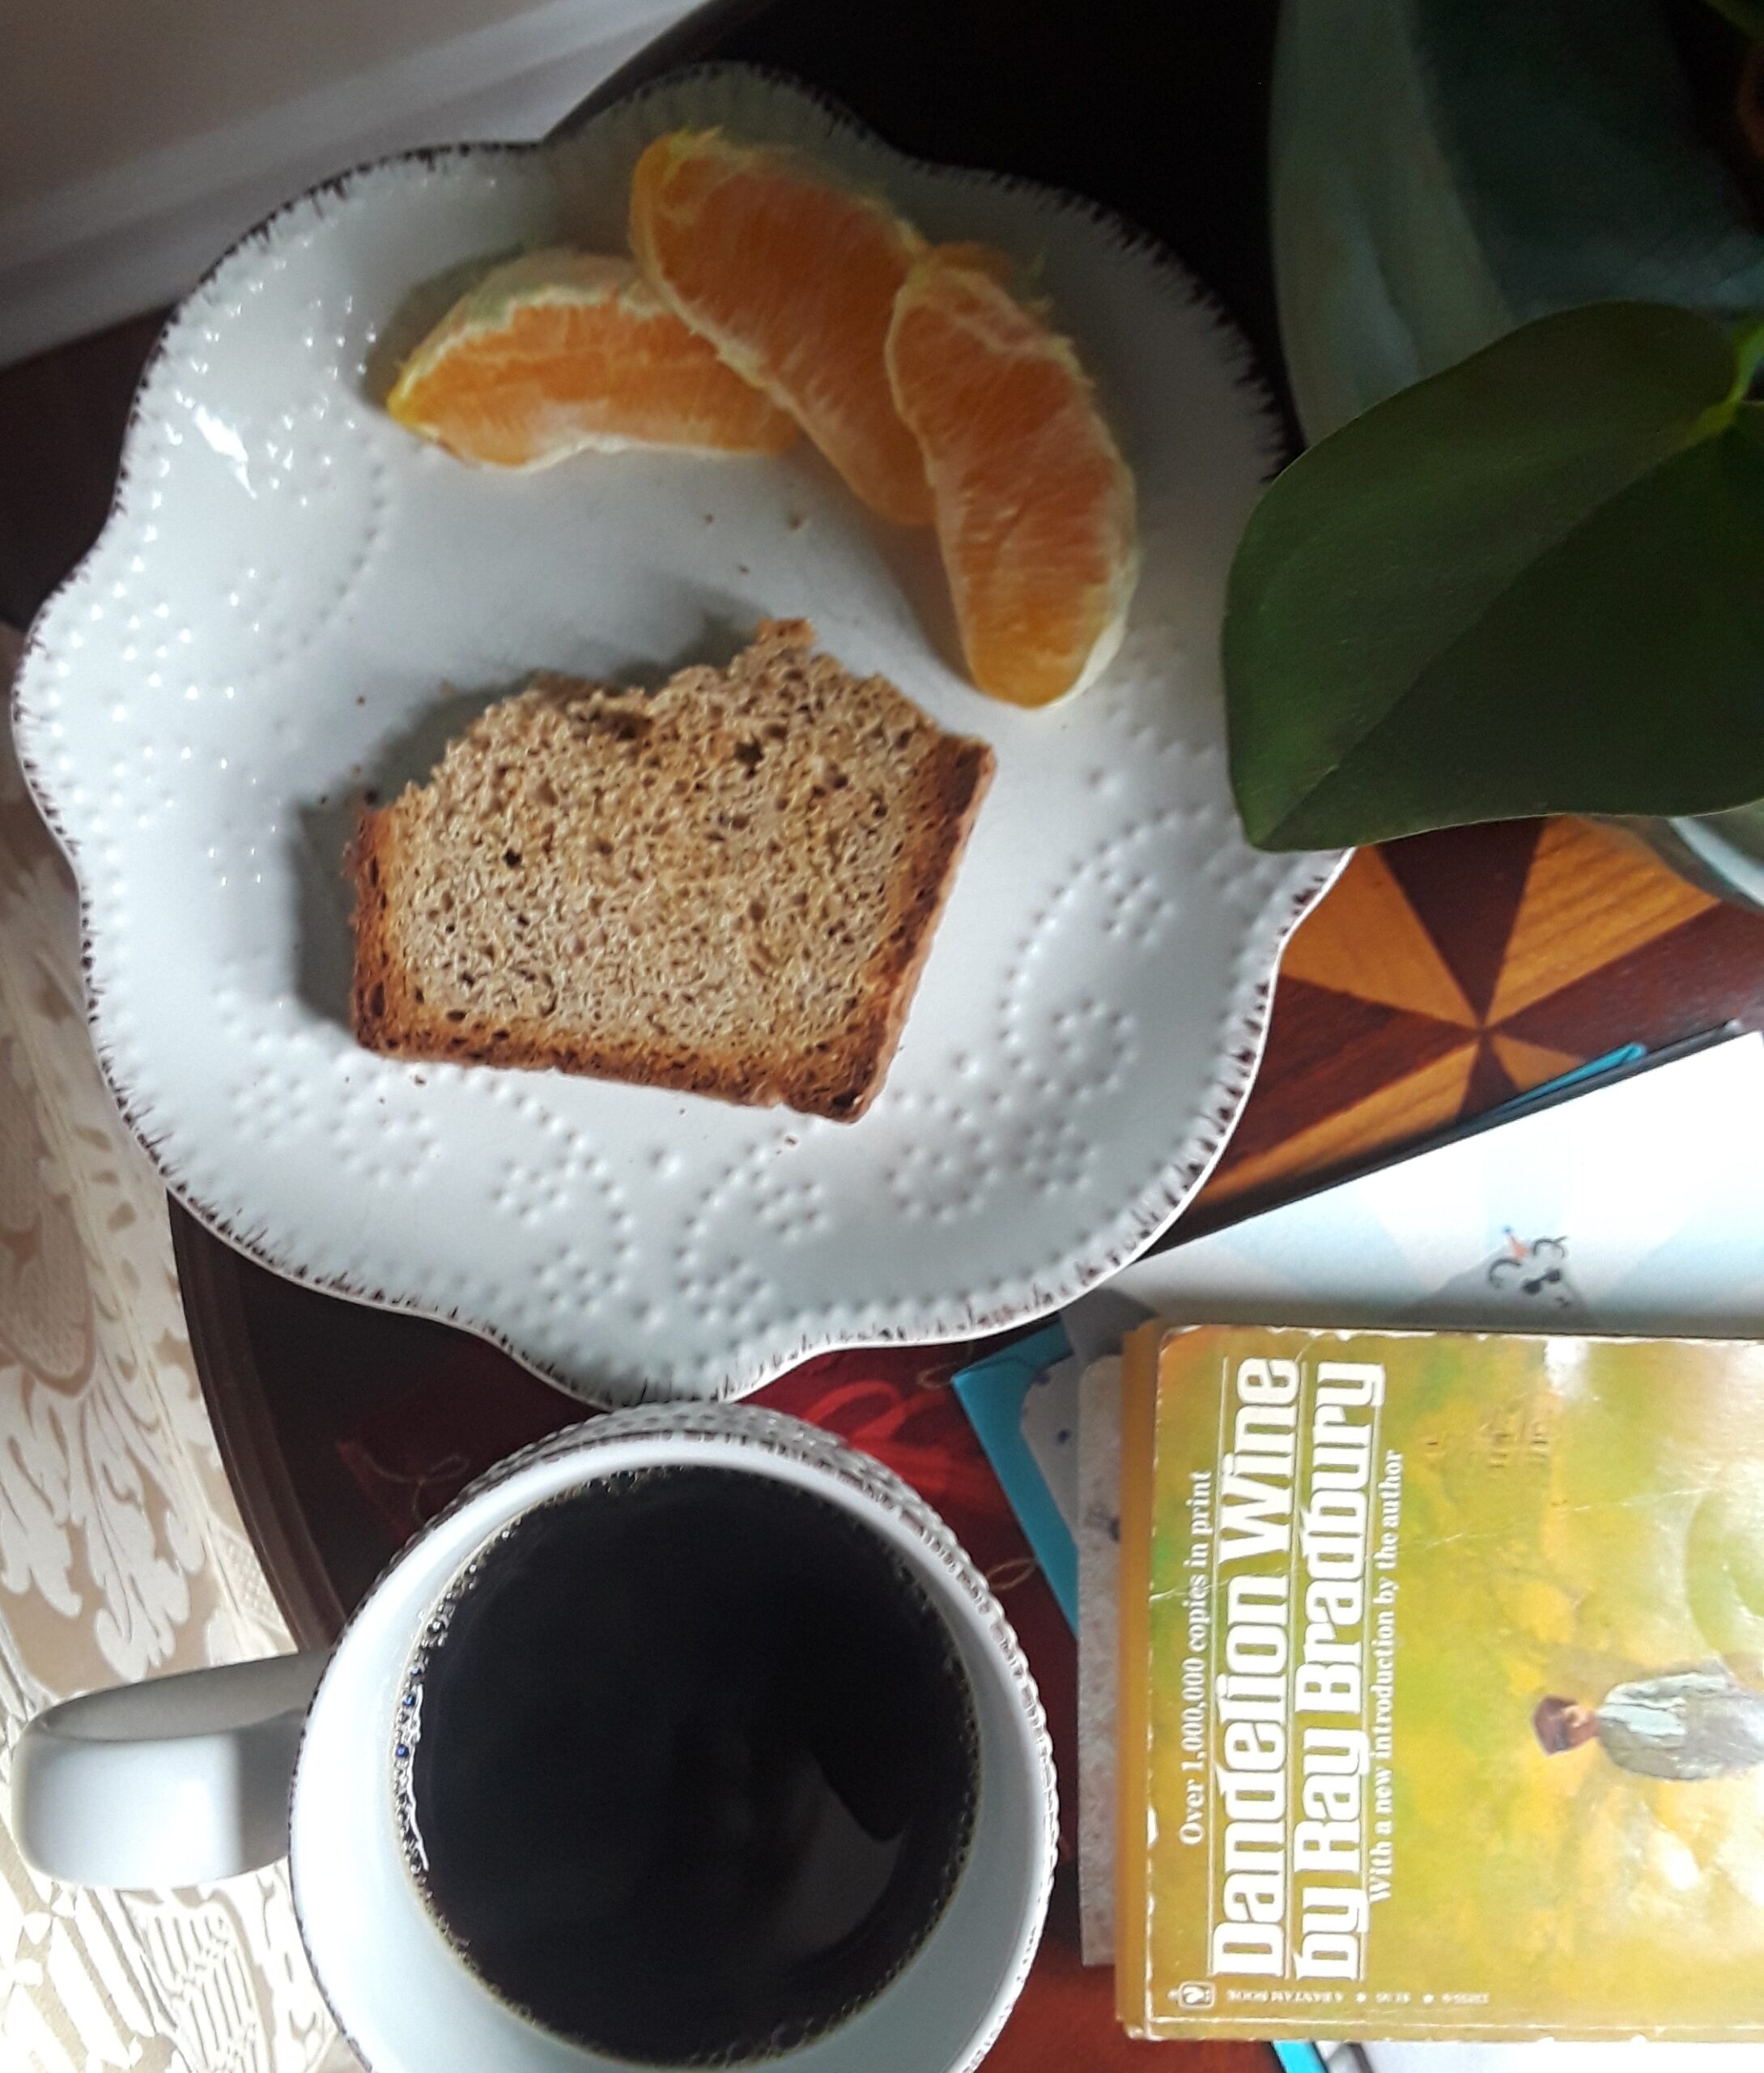 black coffee, dry toast and orange slices are a typical breakfast